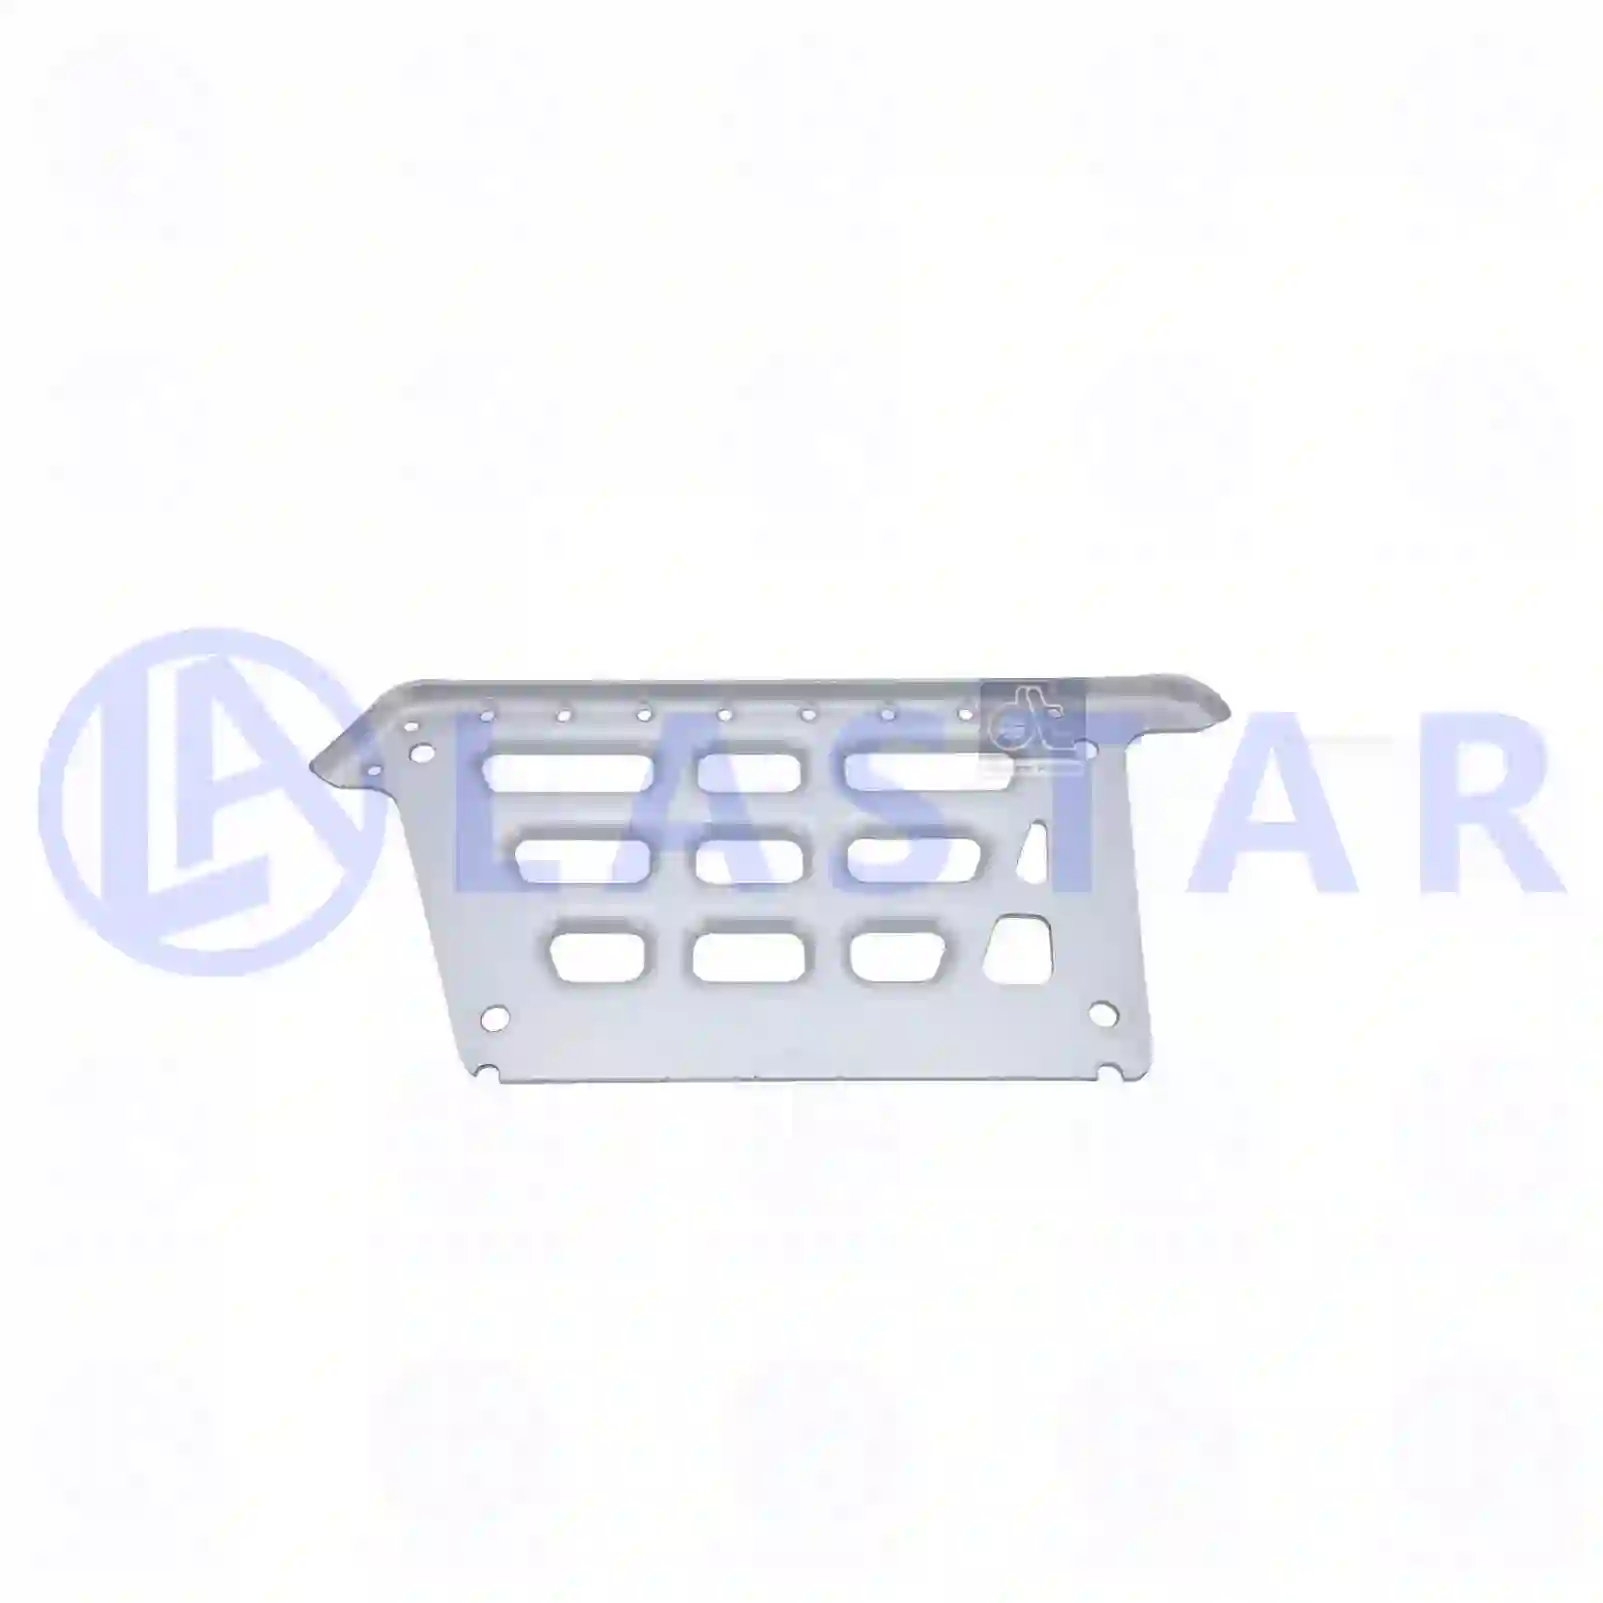 Step plate, right, 77718127, 8191827 ||  77718127 Lastar Spare Part | Truck Spare Parts, Auotomotive Spare Parts Step plate, right, 77718127, 8191827 ||  77718127 Lastar Spare Part | Truck Spare Parts, Auotomotive Spare Parts